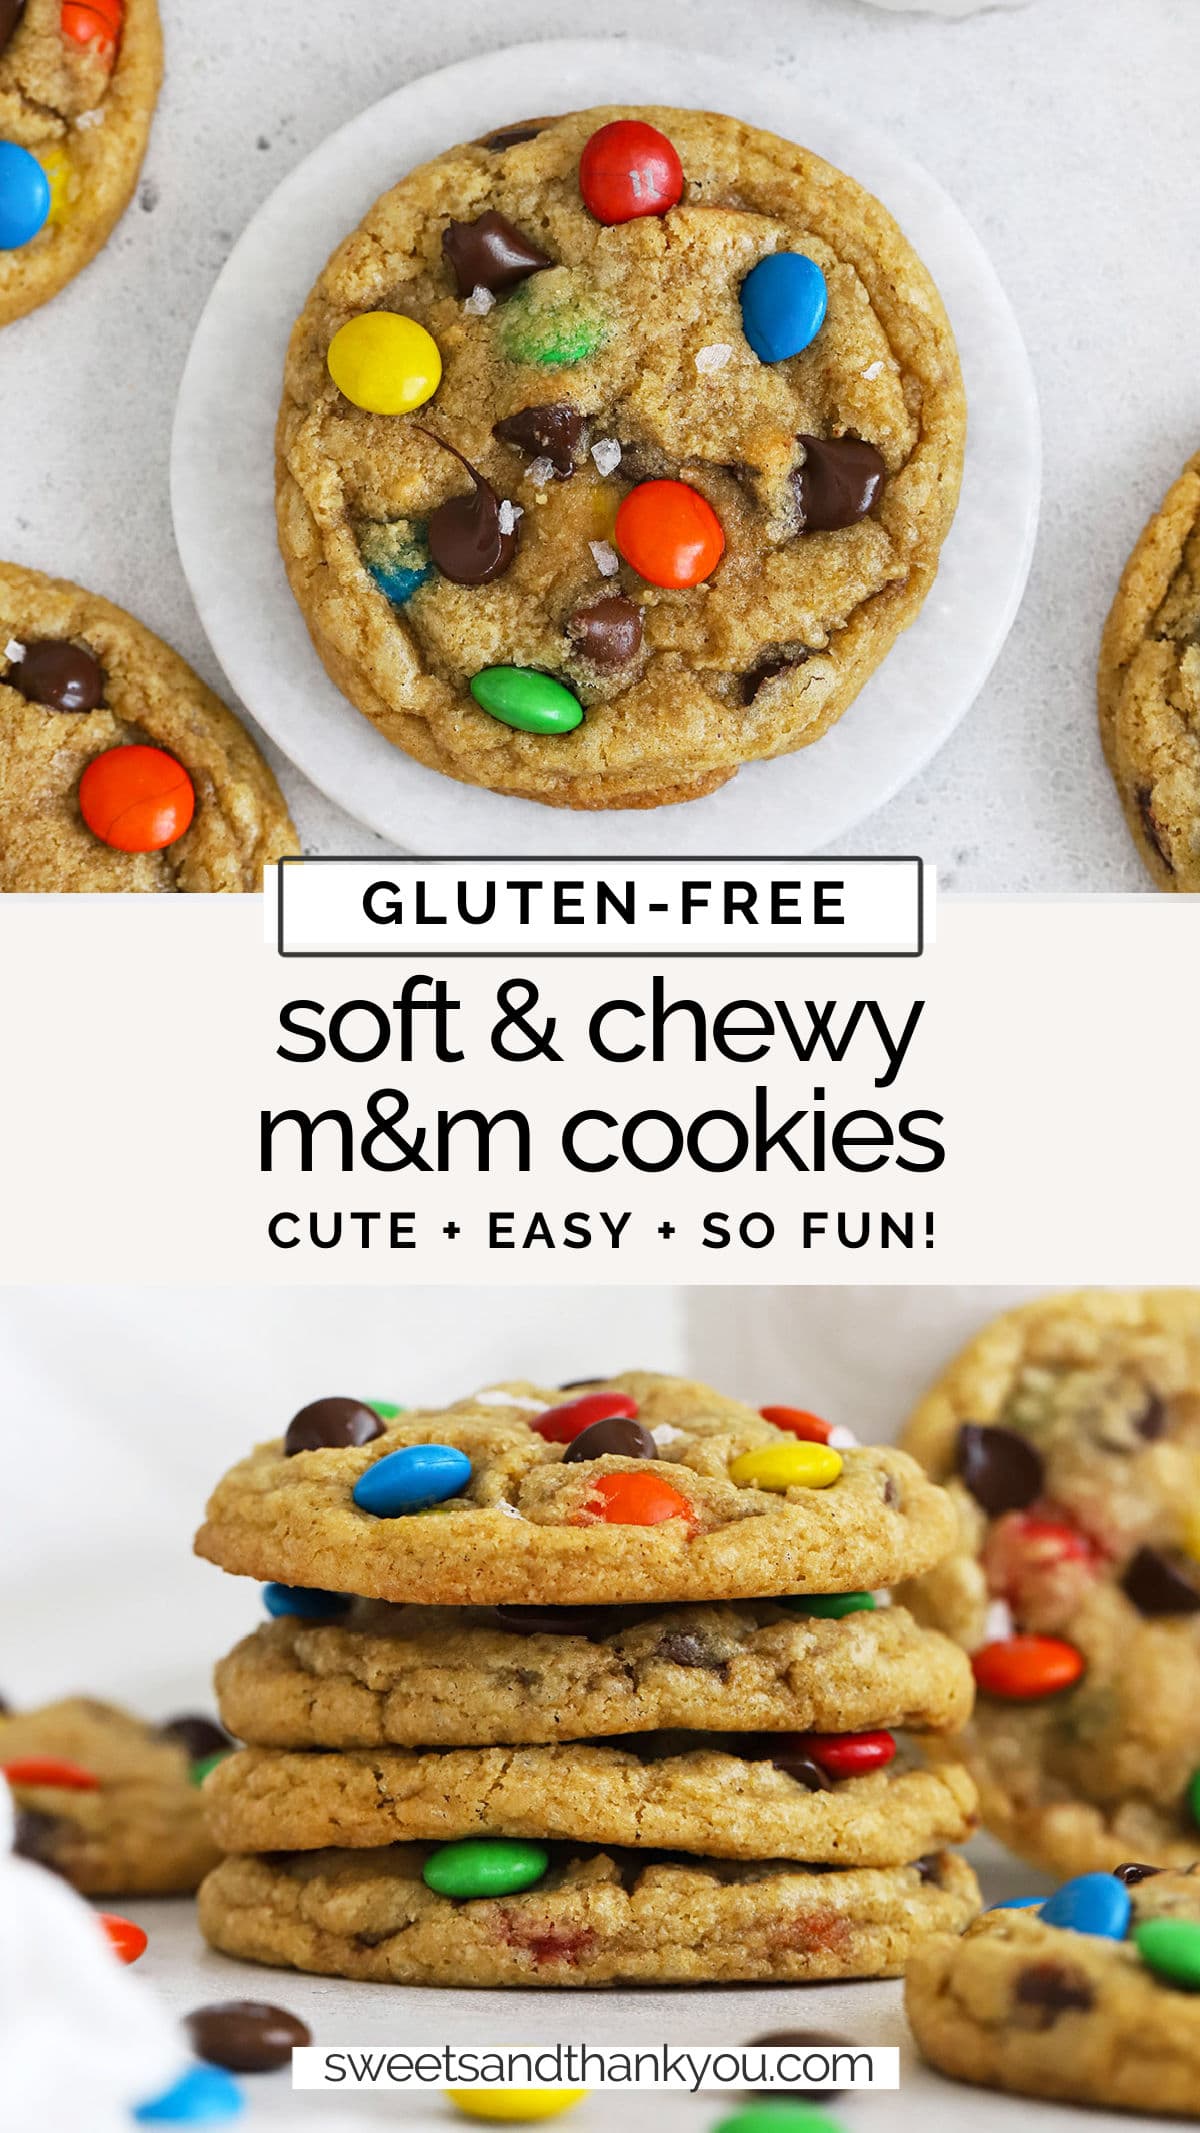 Soft & Chewy Gluten-Free M&M Cookies - This easy gluten-free m&m cookie recipe is perfect for your next cookie craving! Try it with seasonal m&ms to celebrate the holidays! // gluten-free mm cookies // gluten free m&m chocolate chip cookies // gluten-free christmas m&m cookies // gluten-free valentine's m&m cookies // gluten-free christmas cookies // gluten-free valentine's day cookies // gluten-free cookie recipe // gluten free m&m cookies recipe // the best gluten-free m&m cookies